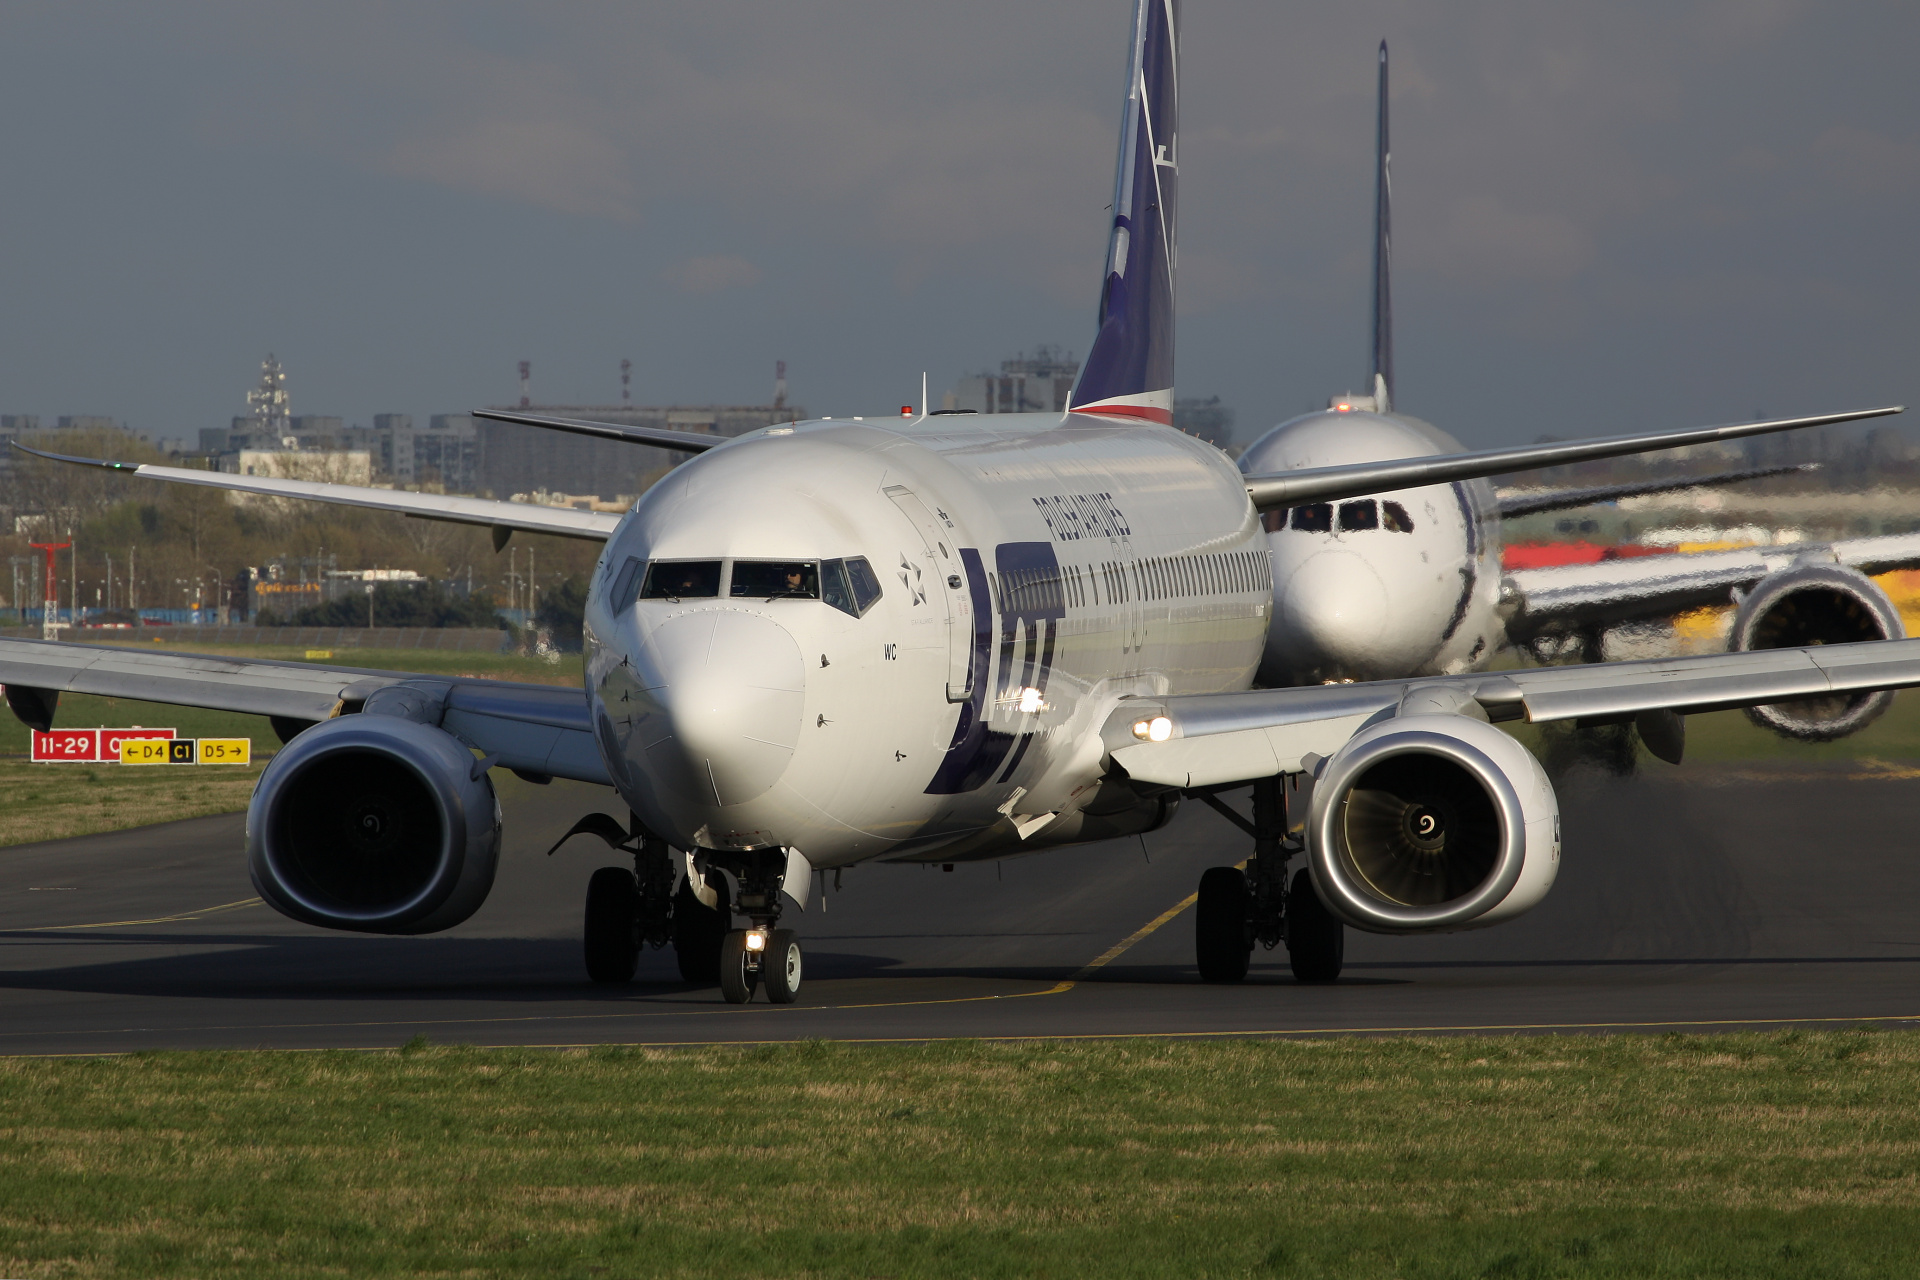 SP-LWC (Aircraft » EPWA Spotting » Boeing 737-800 » LOT Polish Airlines)